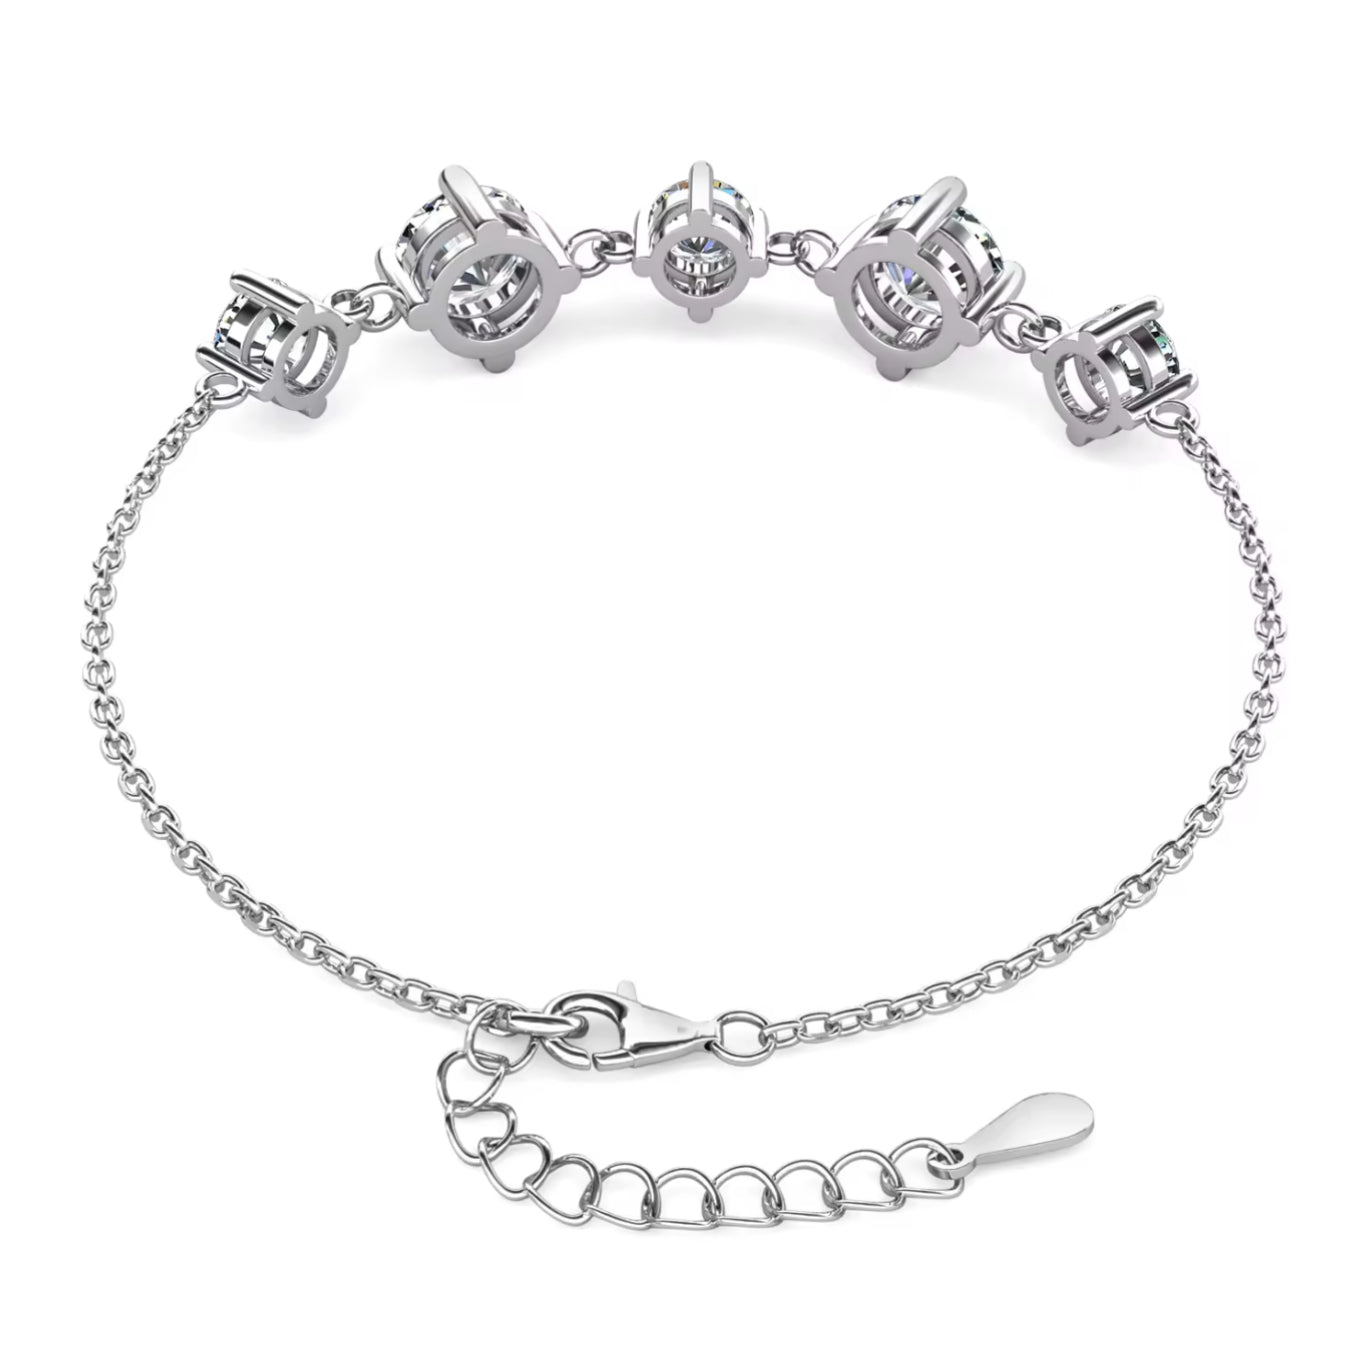 5-row stone bracelet in your choice of colors